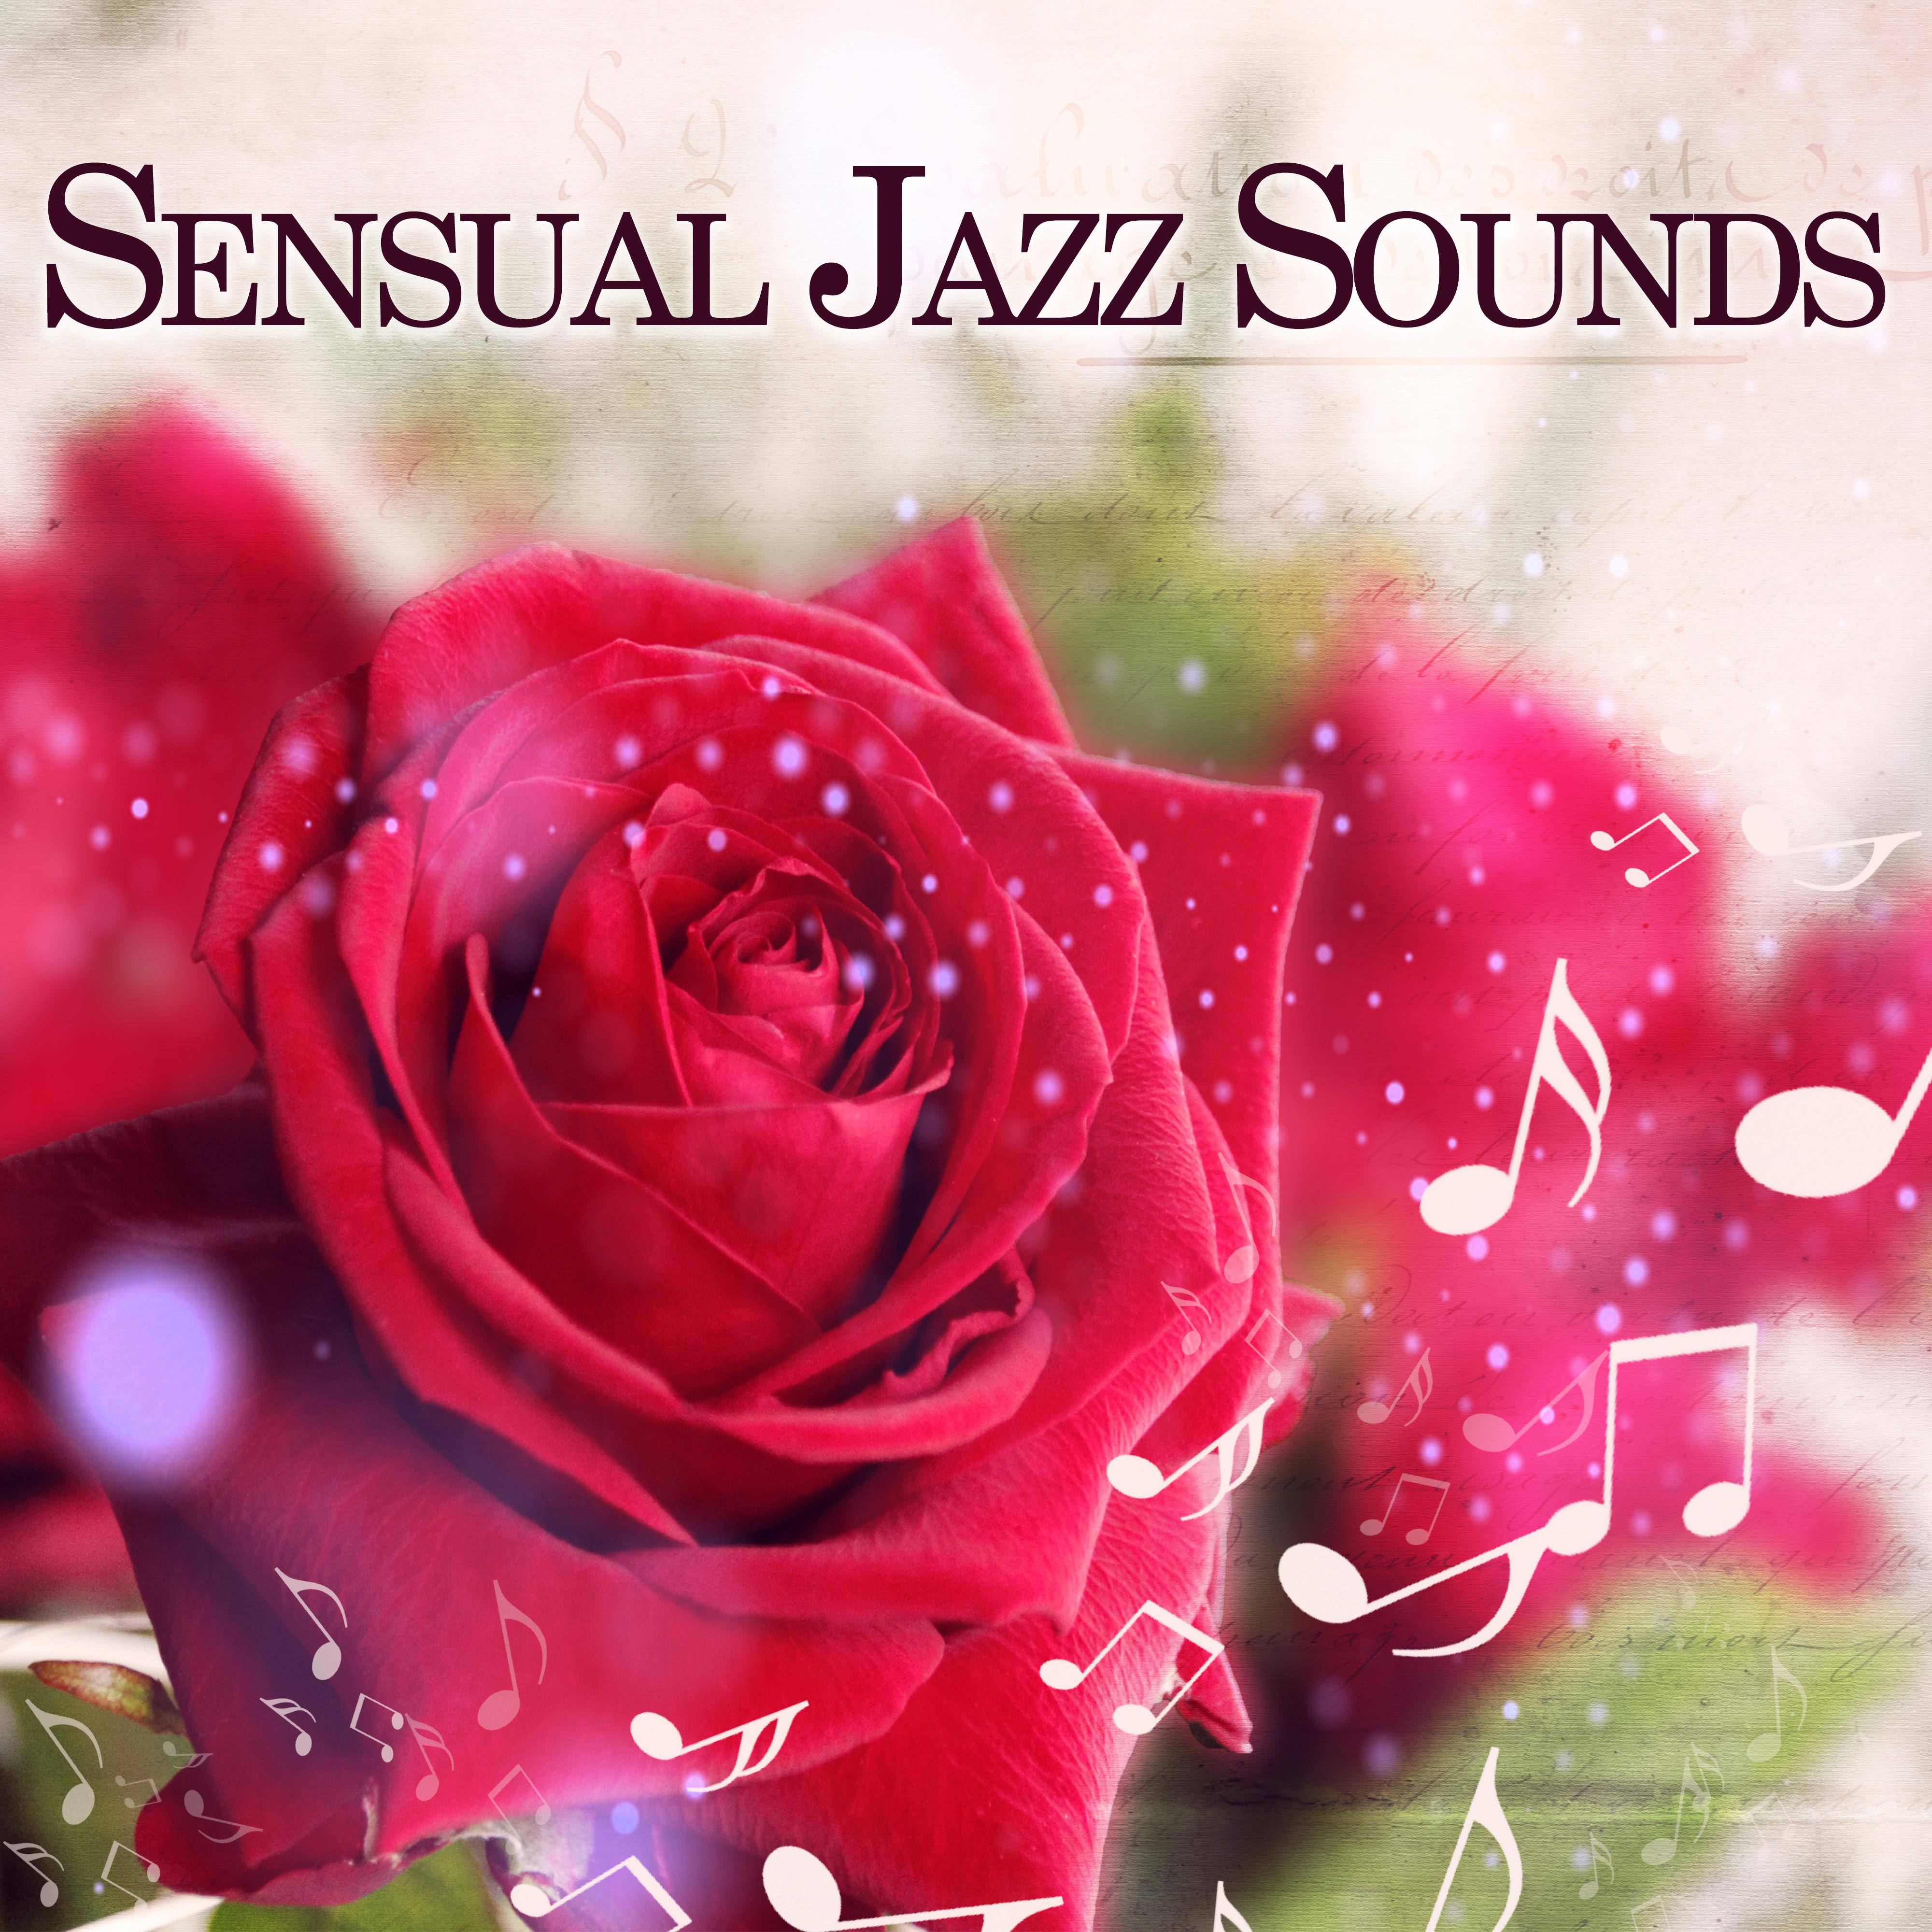 Sensual Jazz Sounds – Music to Relax, Romantic Jazz Note, Sexy Massage, Erotic Moves